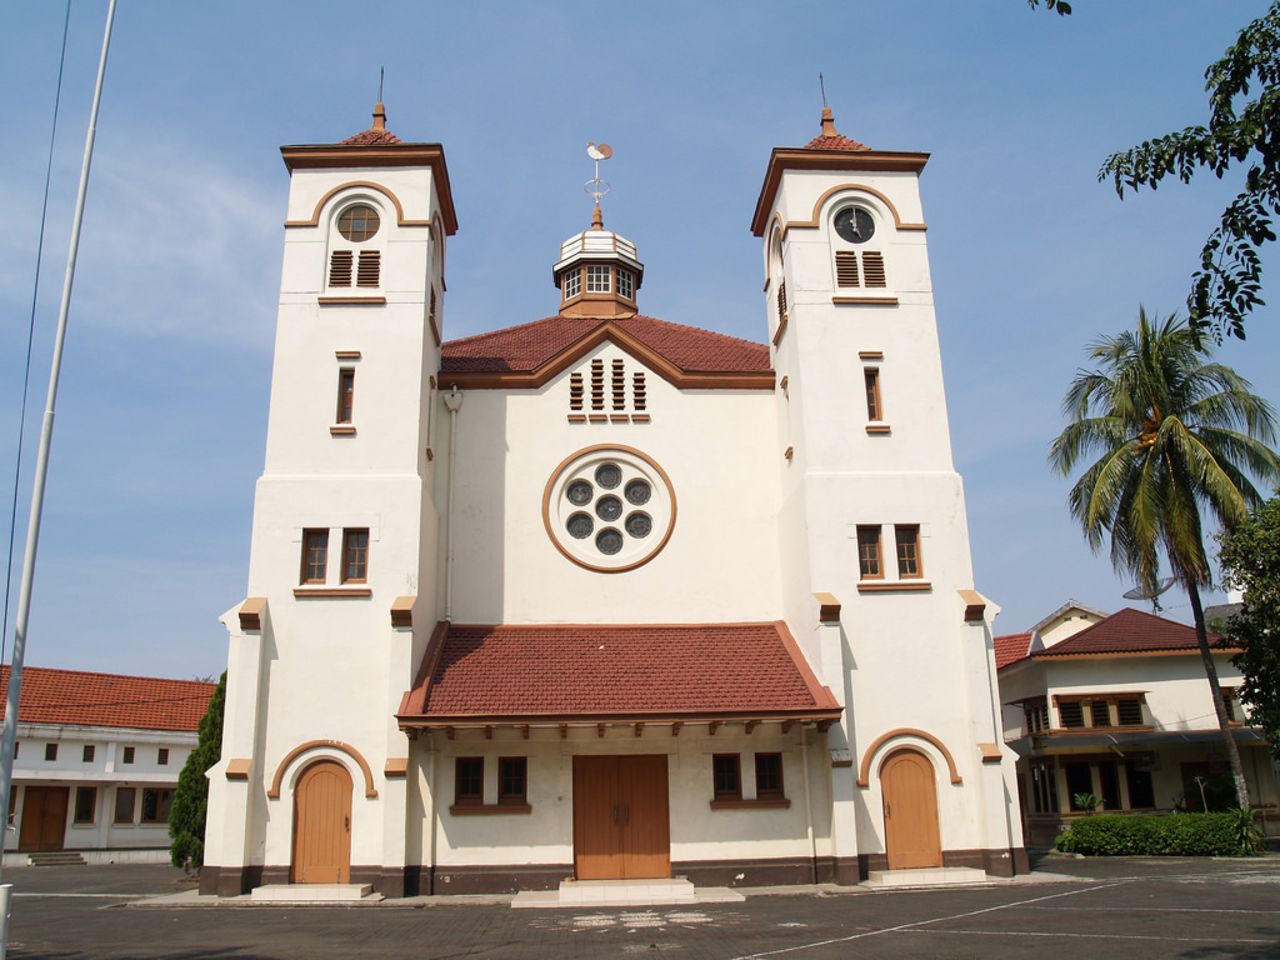 GPIB Pniel was designed by N.A. Hulswit and also nicknamed "the chicken church." The Protestant church takes its nickname not from its shape, but from the rooster weathervane found atop its turret.